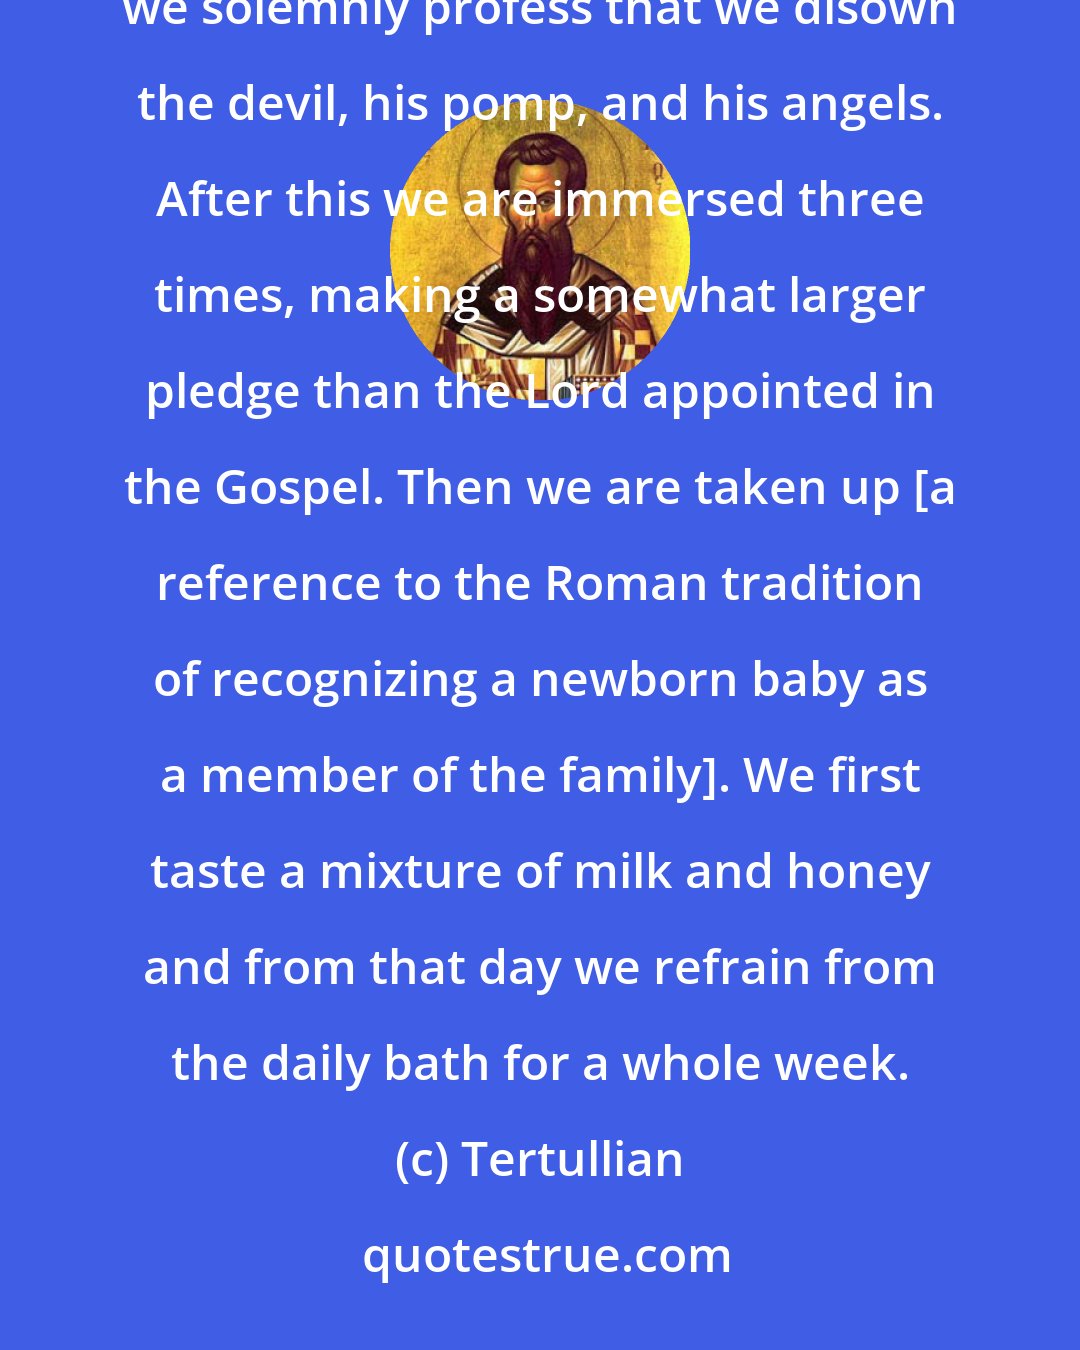 Tertullian: When we are going to enter the water ... in the presence of the congregation and under the hand of the president, we solemnly profess that we disown the devil, his pomp, and his angels. After this we are immersed three times, making a somewhat larger pledge than the Lord appointed in the Gospel. Then we are taken up [a reference to the Roman tradition of recognizing a newborn baby as a member of the family]. We first taste a mixture of milk and honey and from that day we refrain from the daily bath for a whole week.